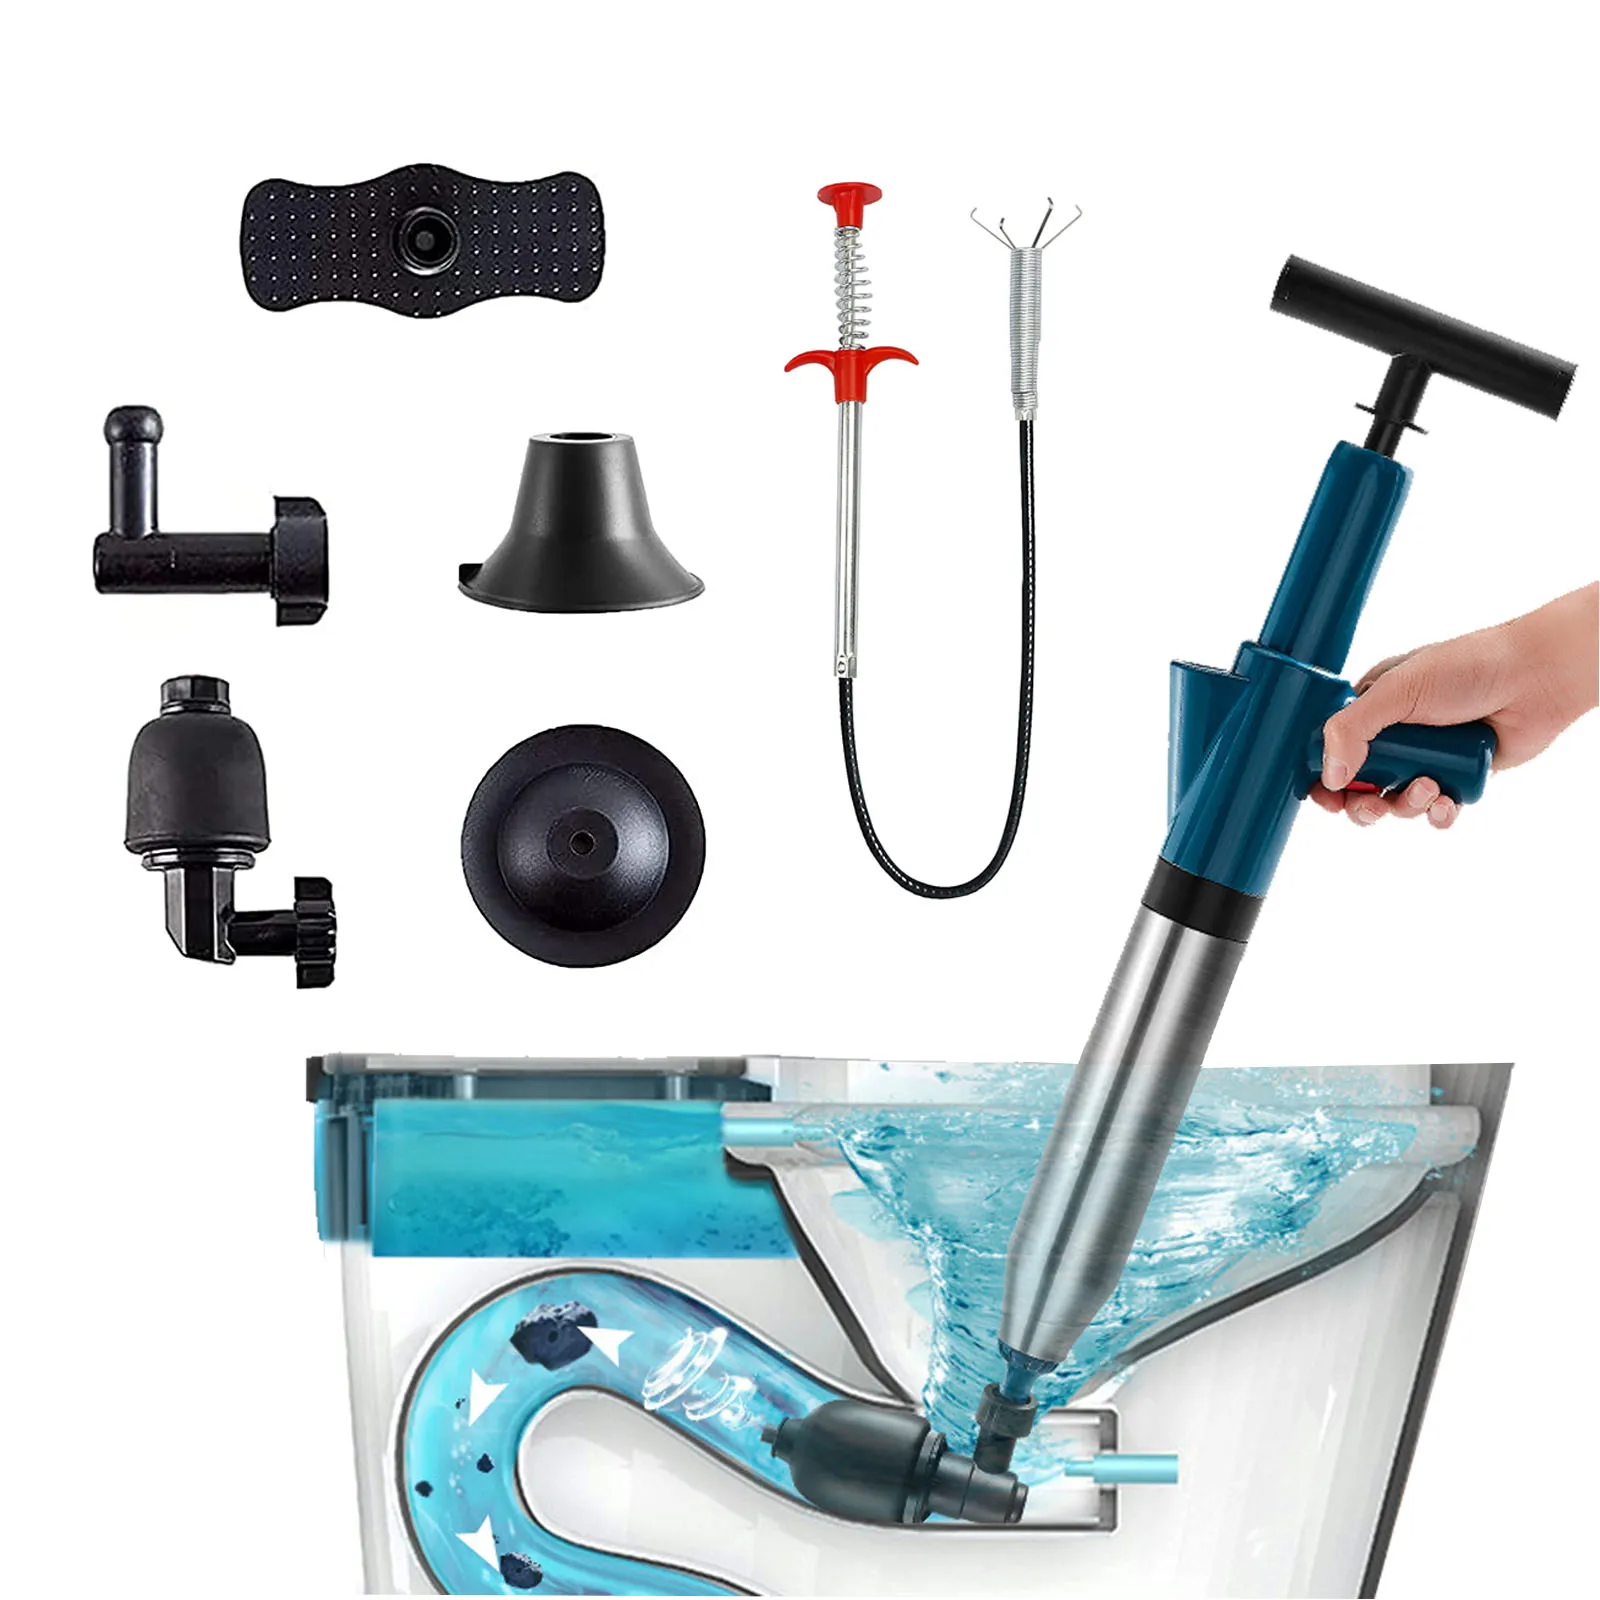 

2022 hotsale Manual Multi Function Drain Clean Pump Stainless Steel Toilet Plunger new design